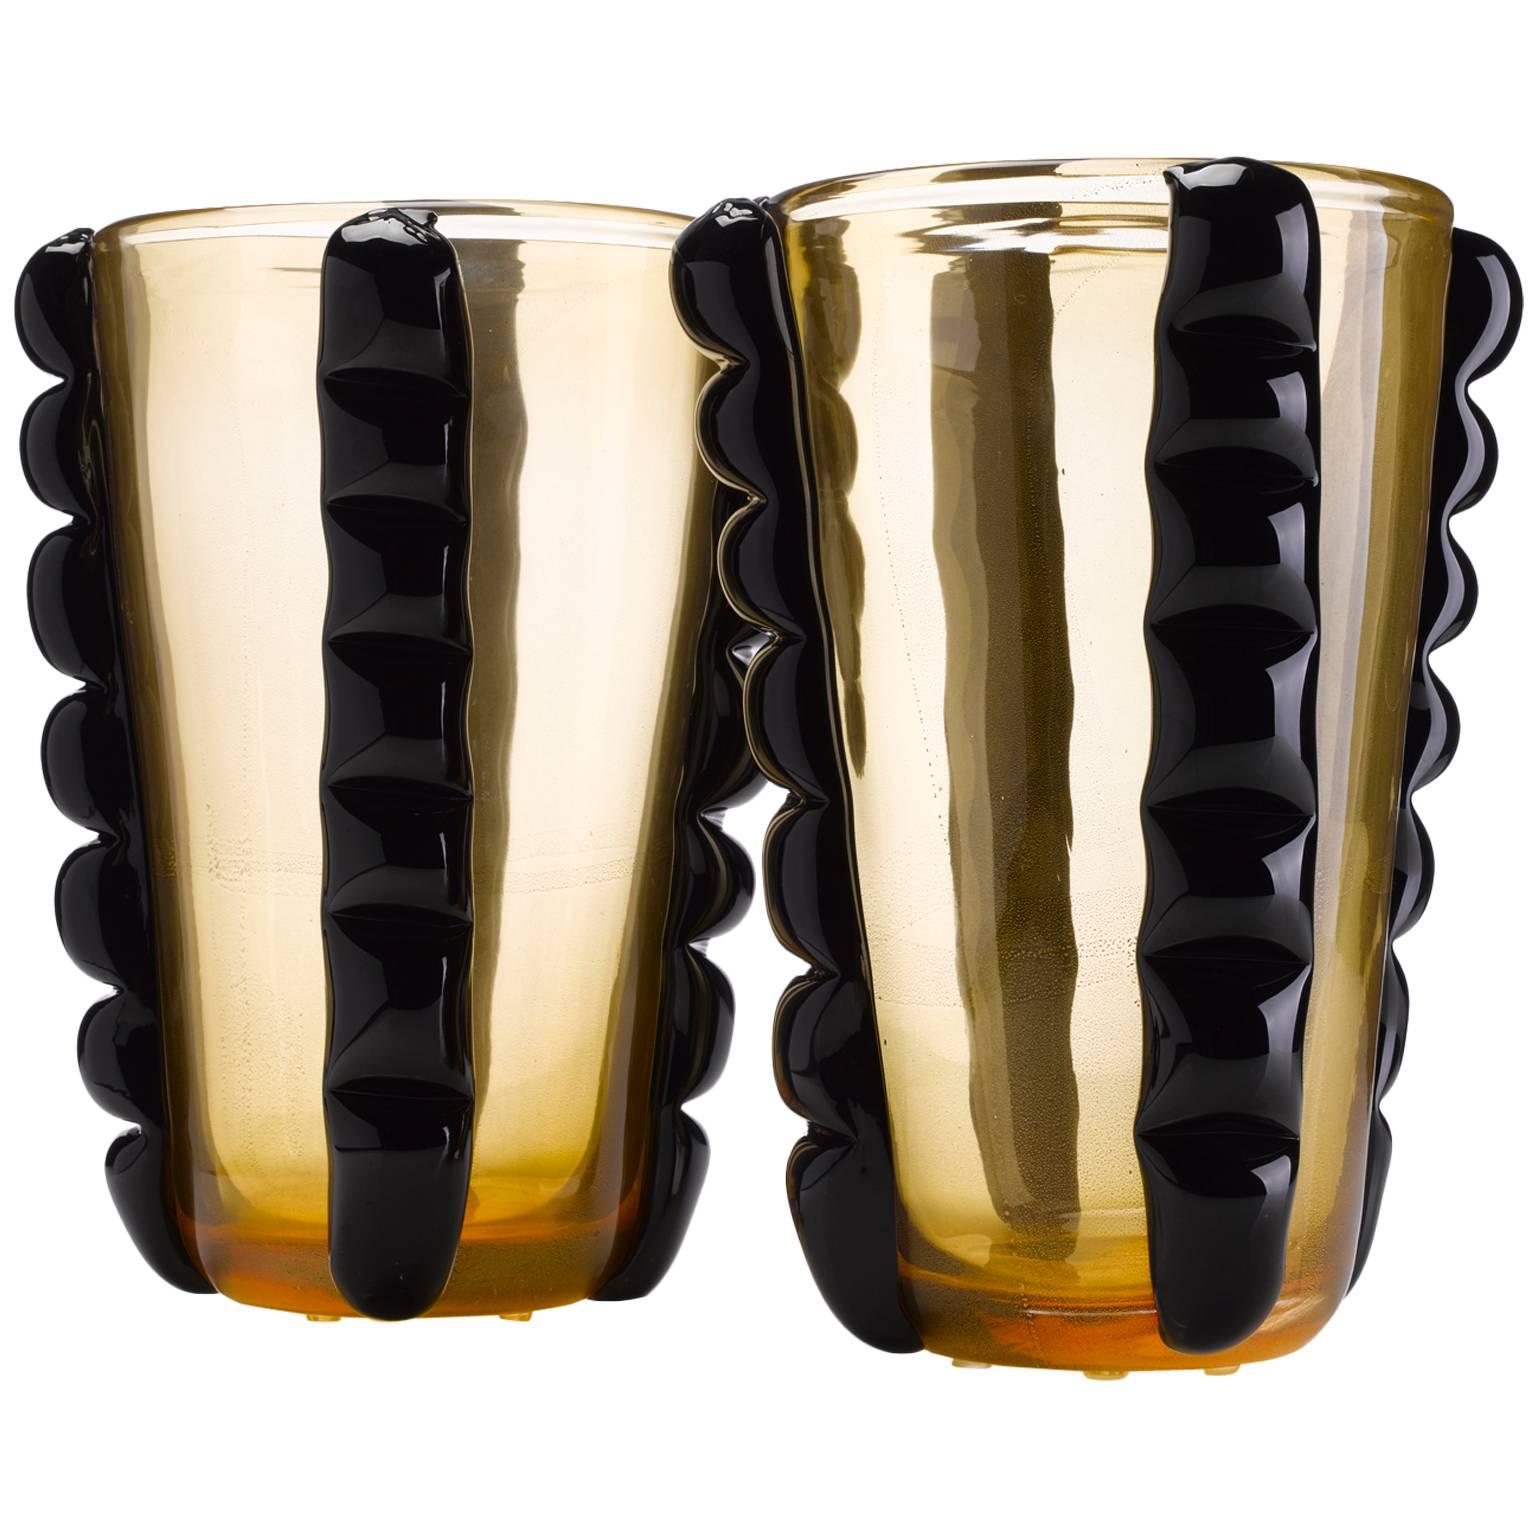 Pair of Signed Pino Signoretto Gold and Black Vases